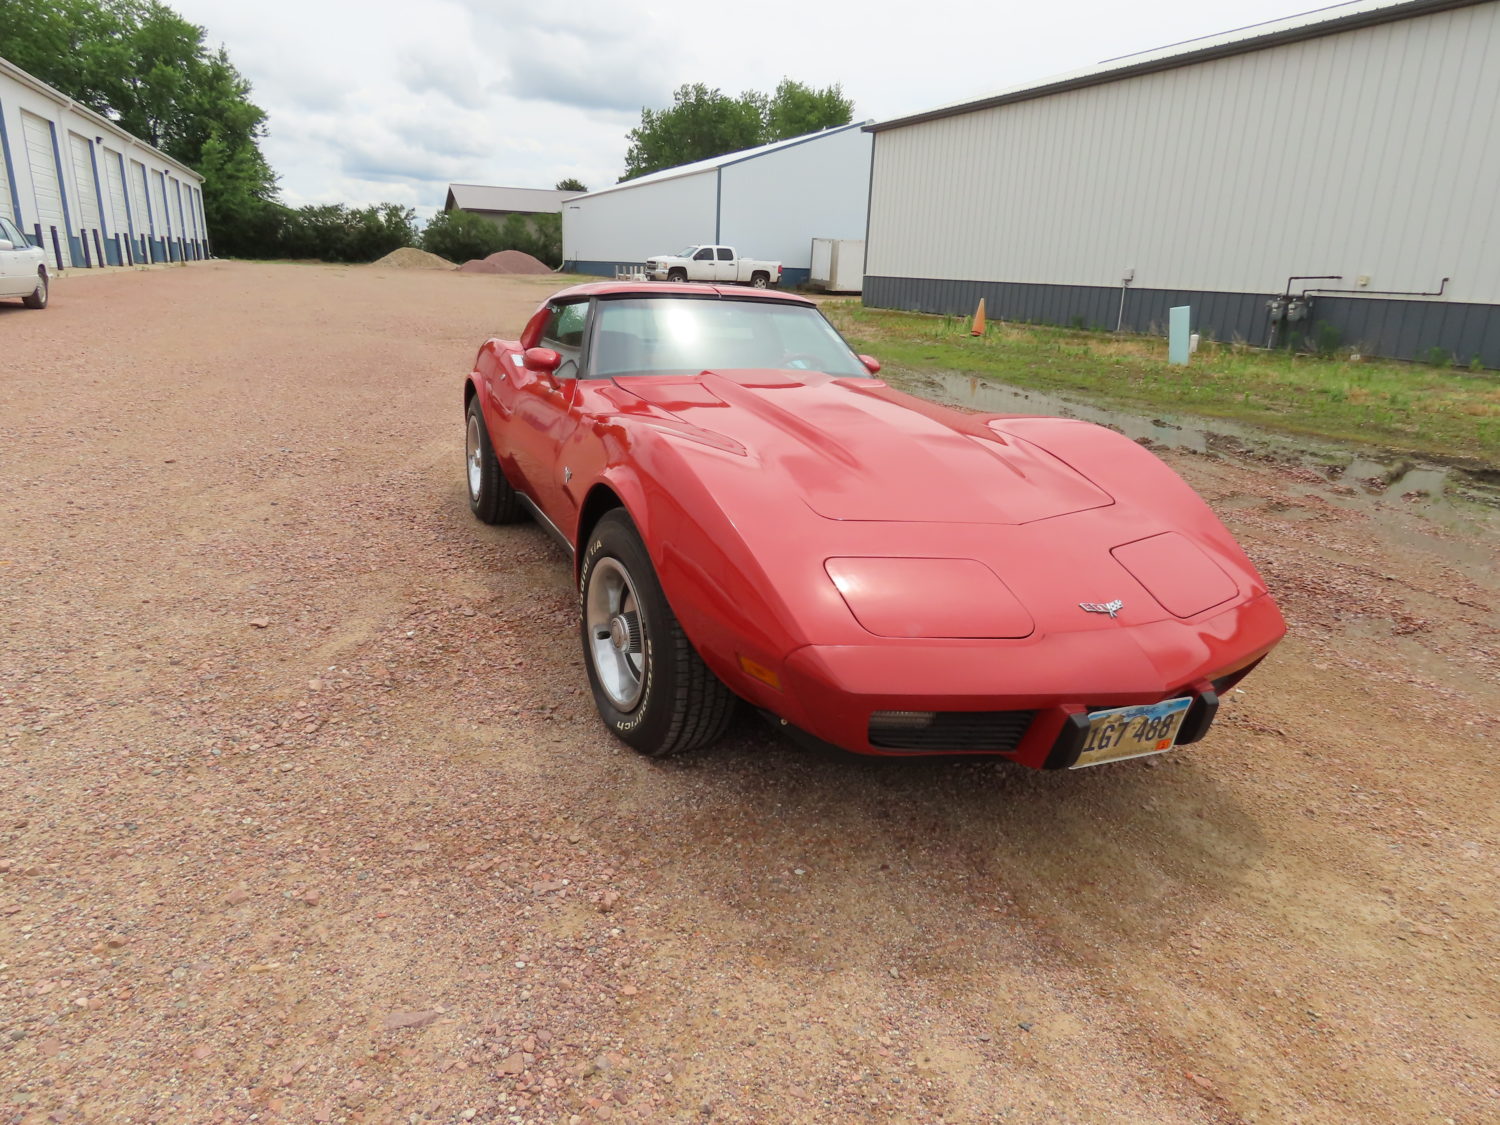 Amazing Commercial Real Estate, Corvettes, Tools, Impala Convertible, & More! Kersbergen Collection-Real Estate Auction!  - image 7